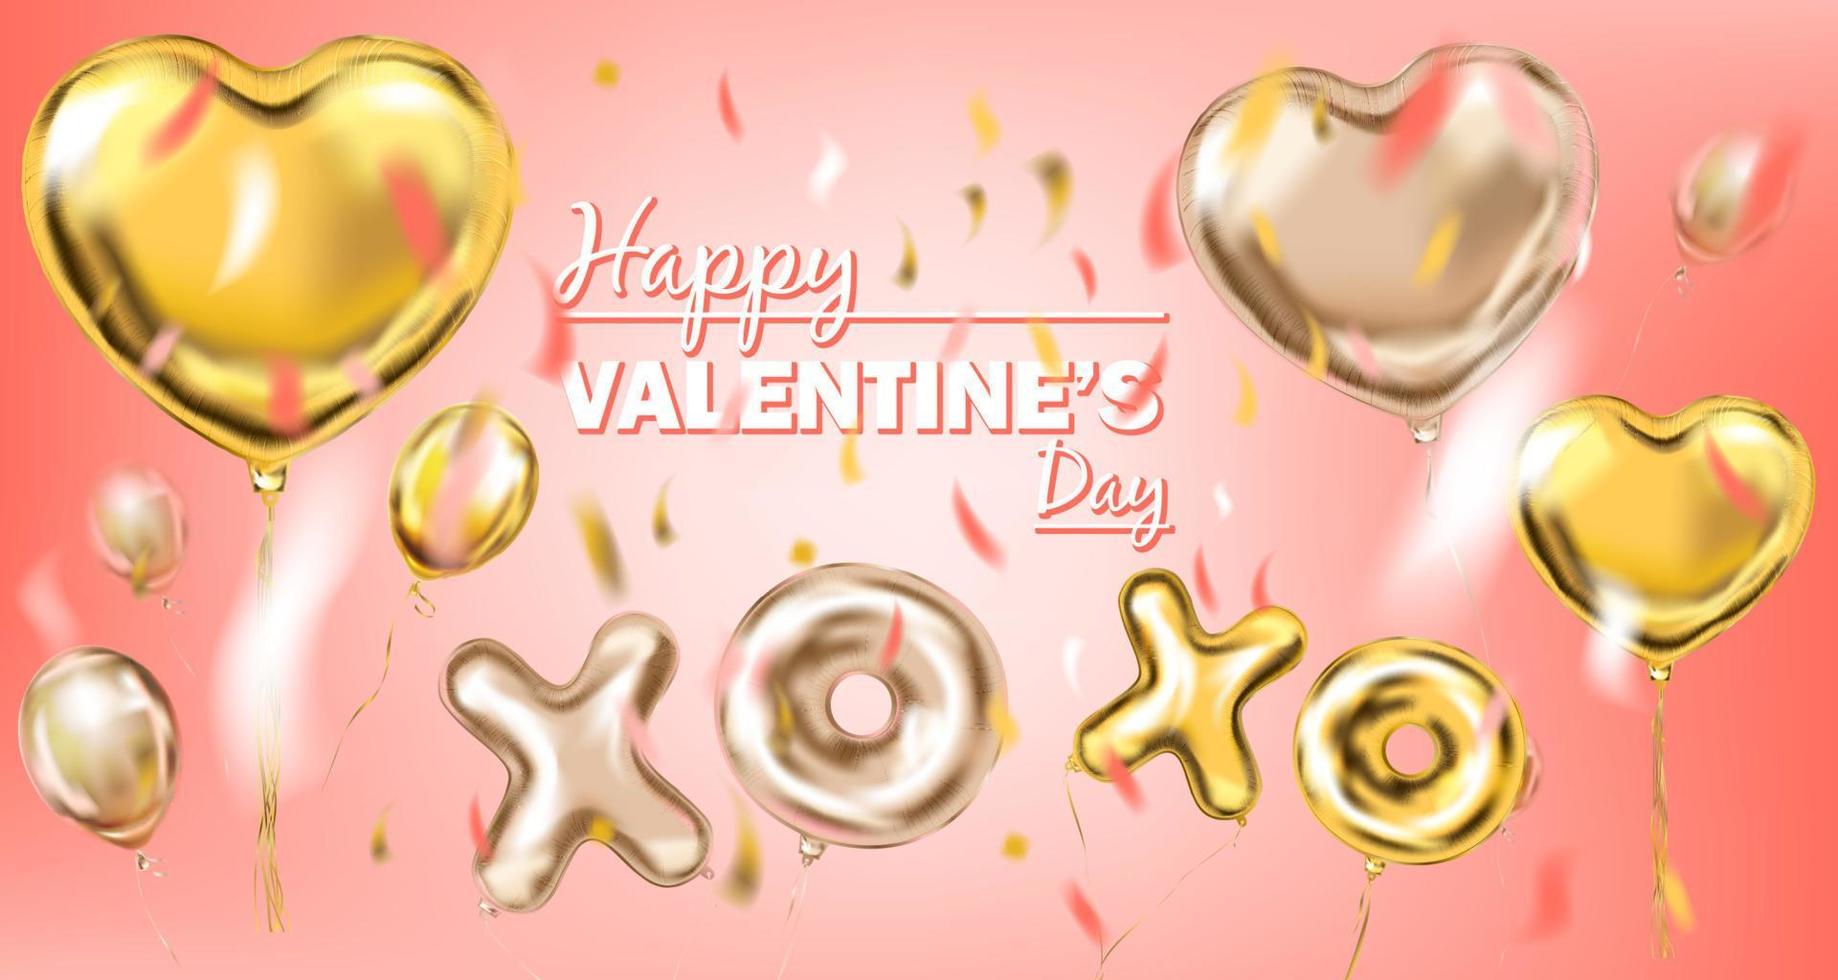 Happy Valentine and Pink Gold Foil Heart Shape Balloon, golden kiss and hug symbol vector